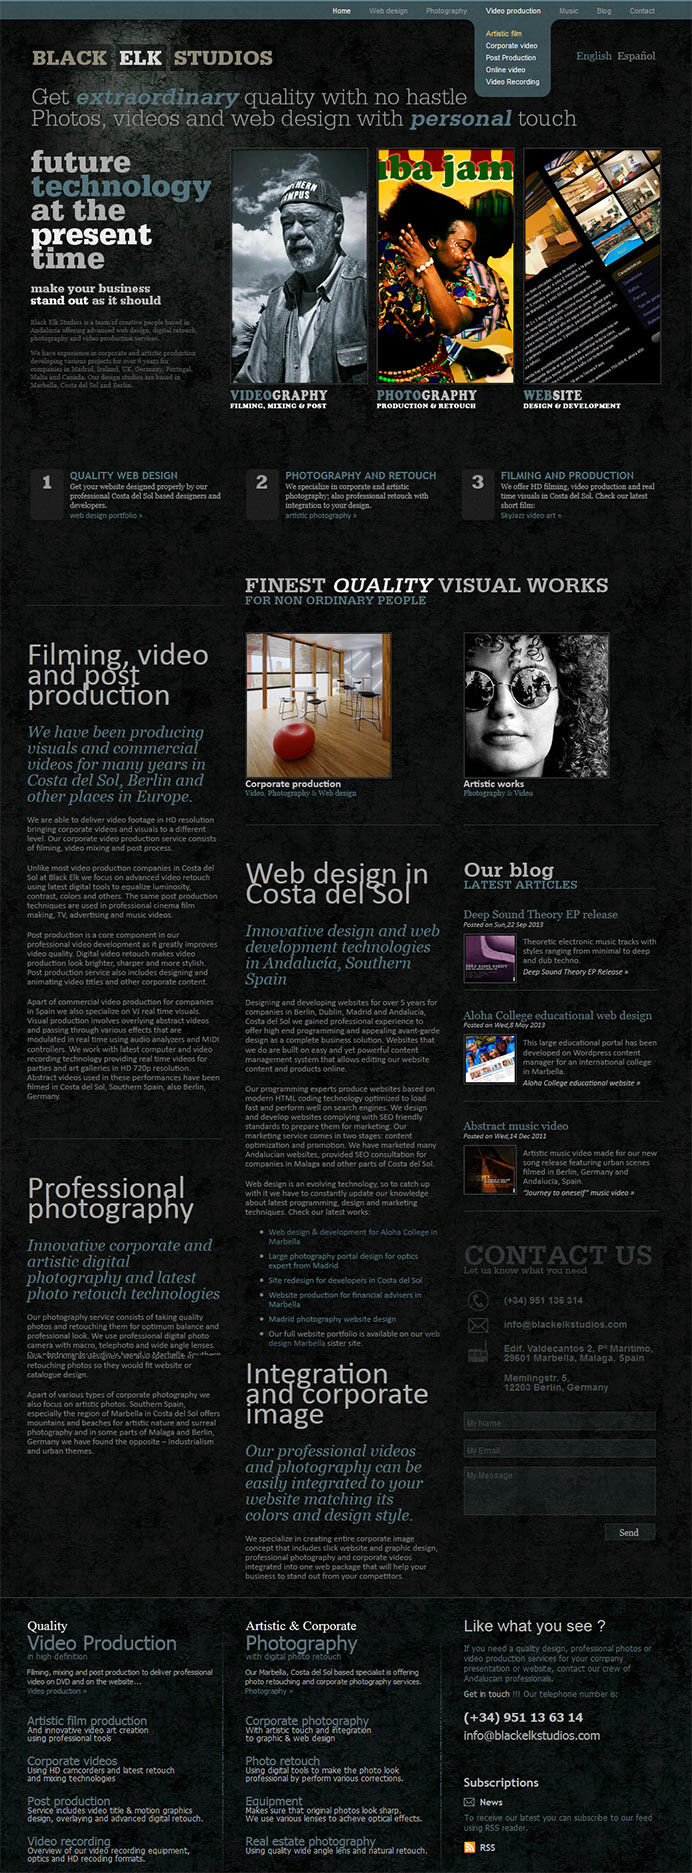 Studio specializes in designing and developing websites, video production and photography in Madird, Marbella and Berlin